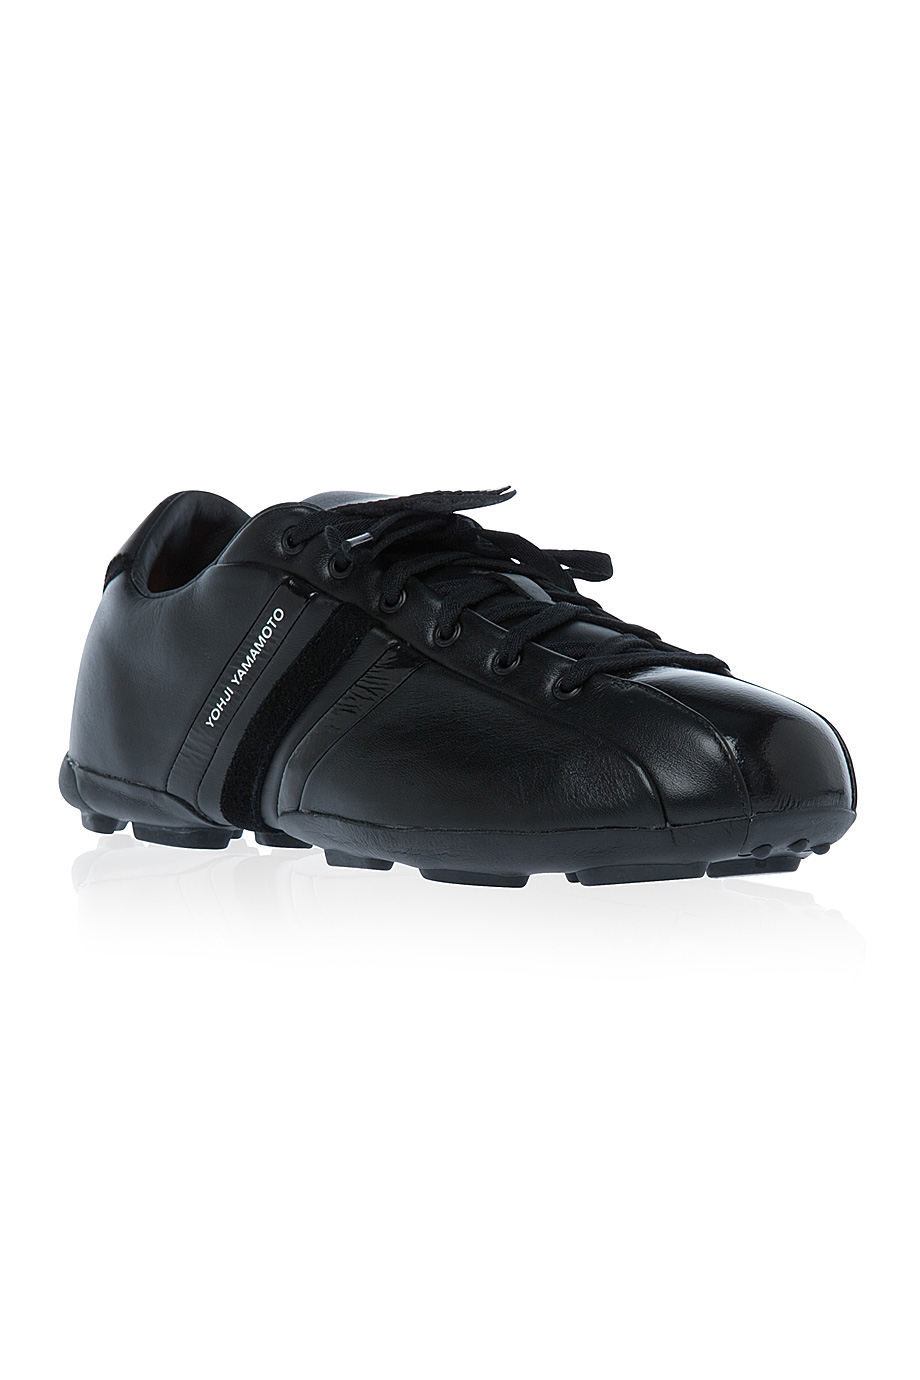 Y-3 Y3 Field Classic Black Trainers for 